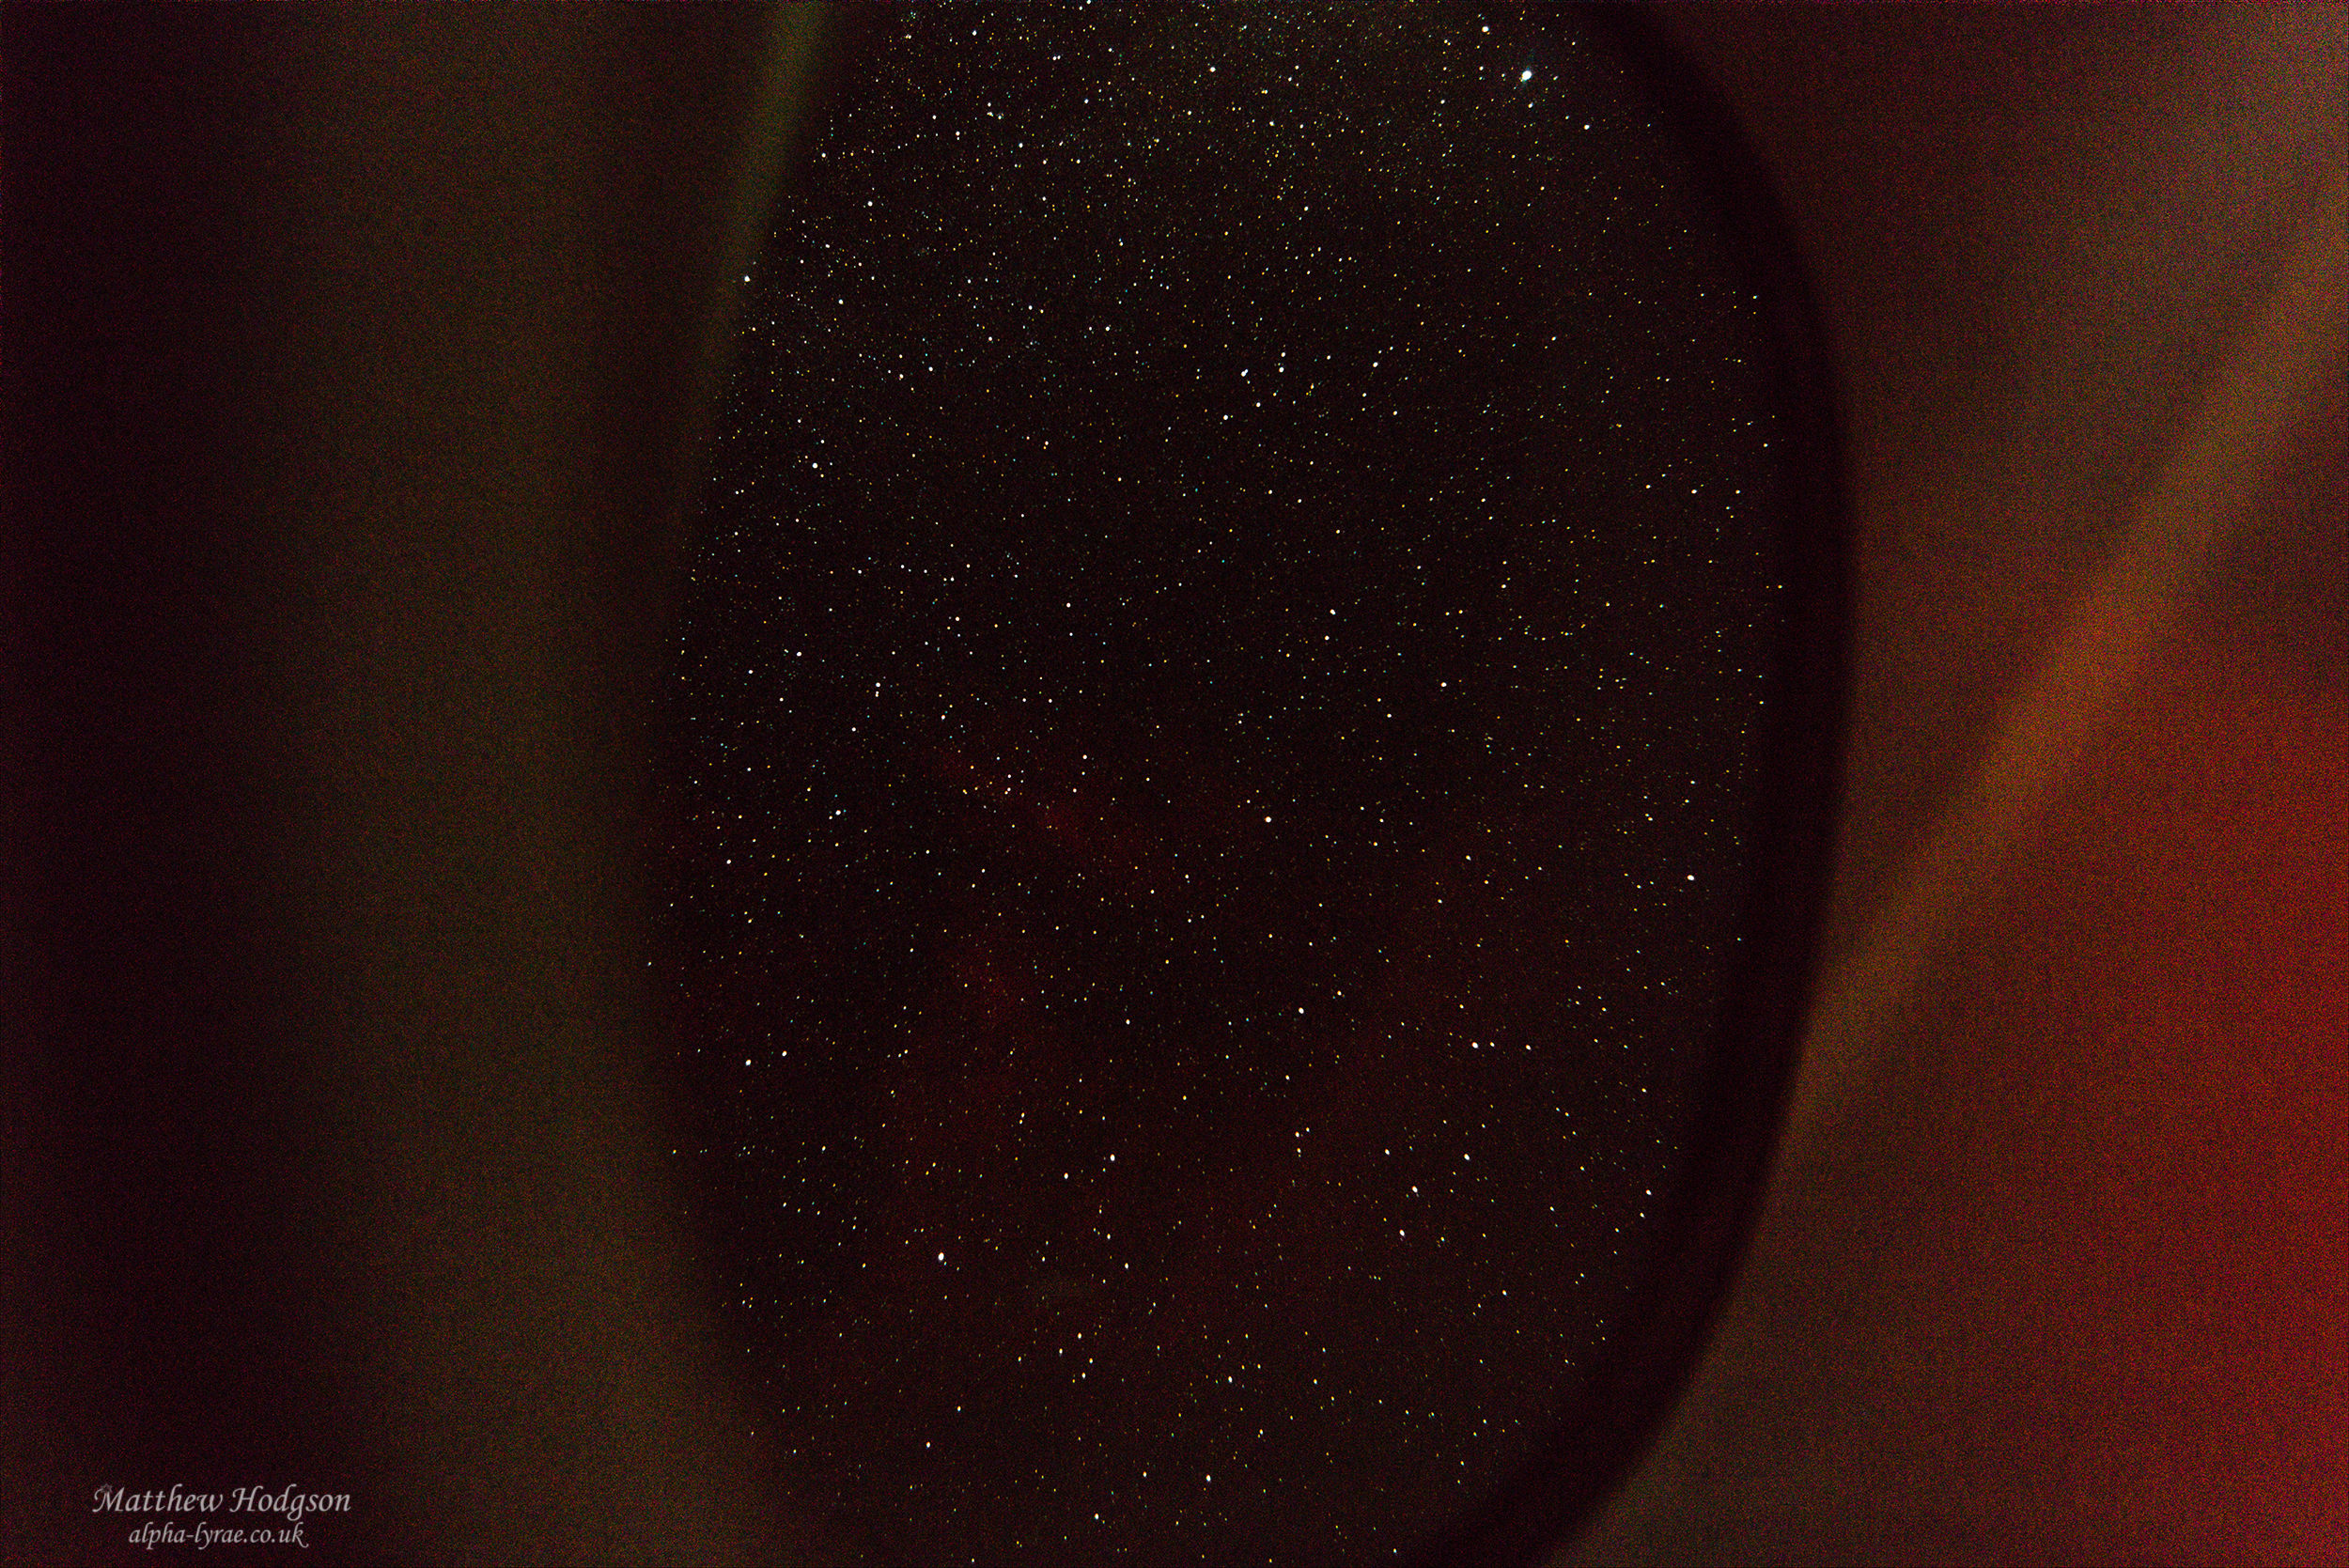 Photo capturing several summer constellations out the window of the A380.